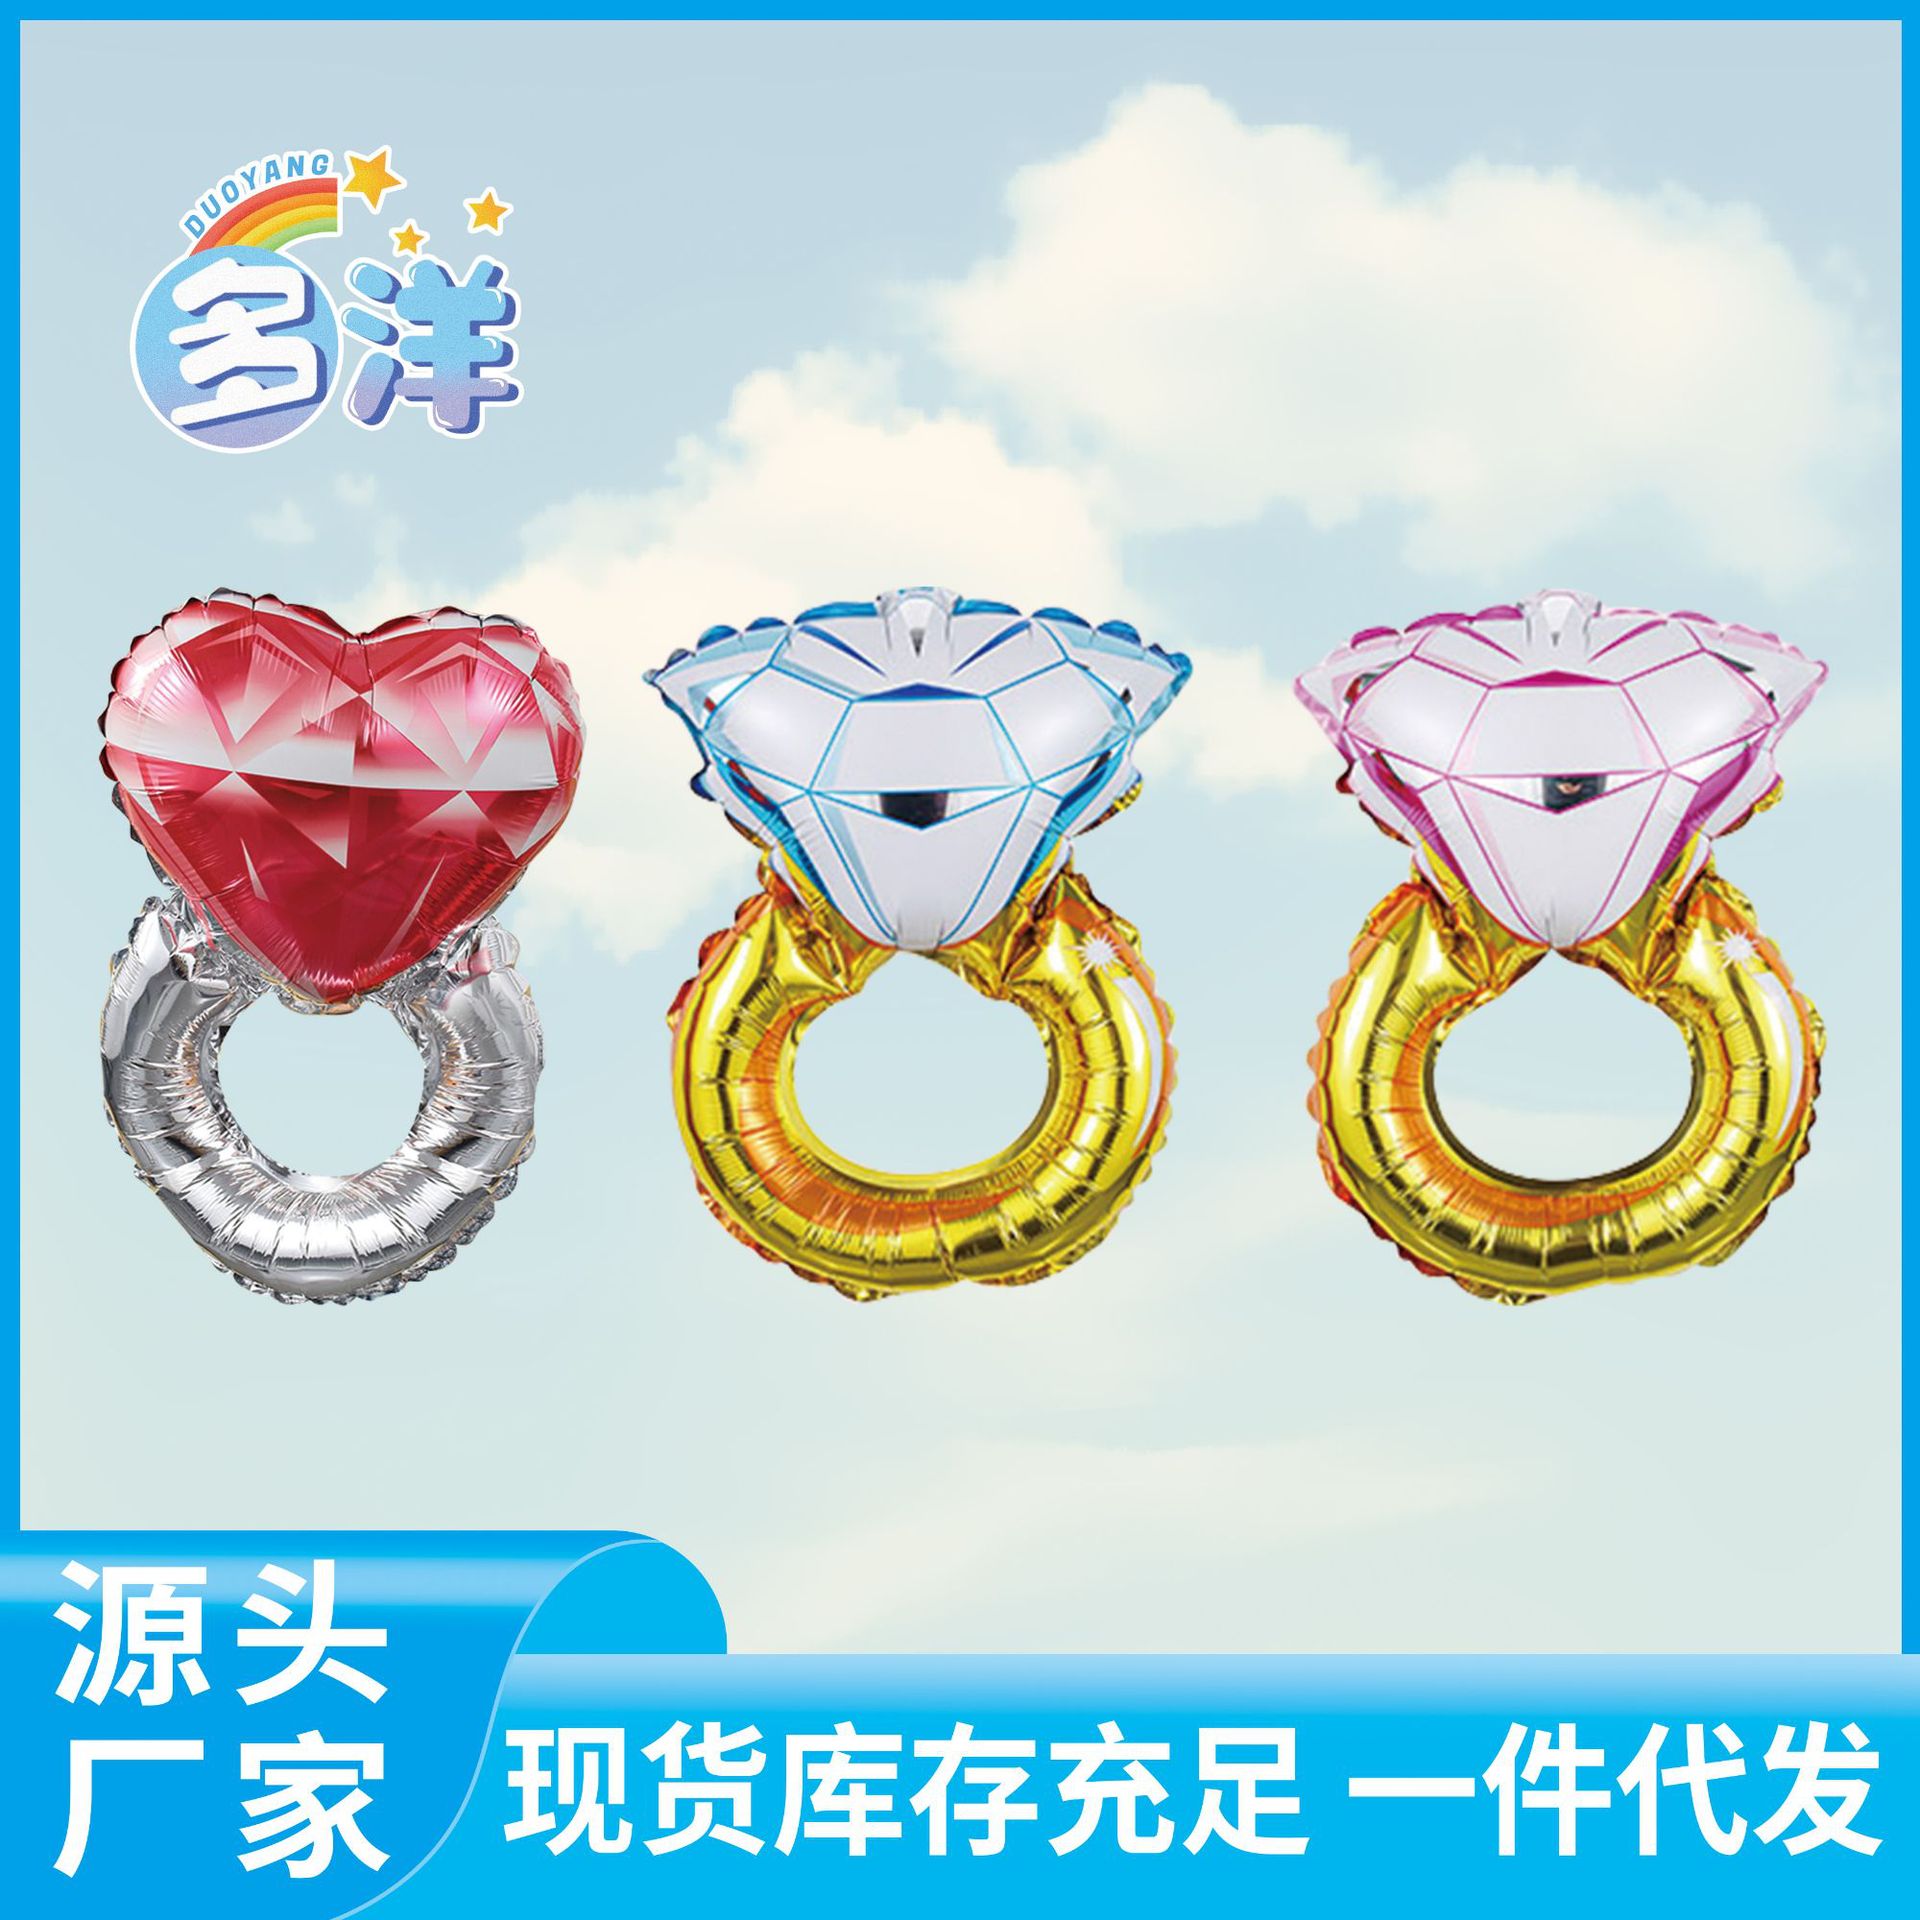 Duoyang Mother's Day Valentine's Day Rose Balloon Gift Kindergarten to Give Mom Ceremony Sense Shopping Mall Activity Gift